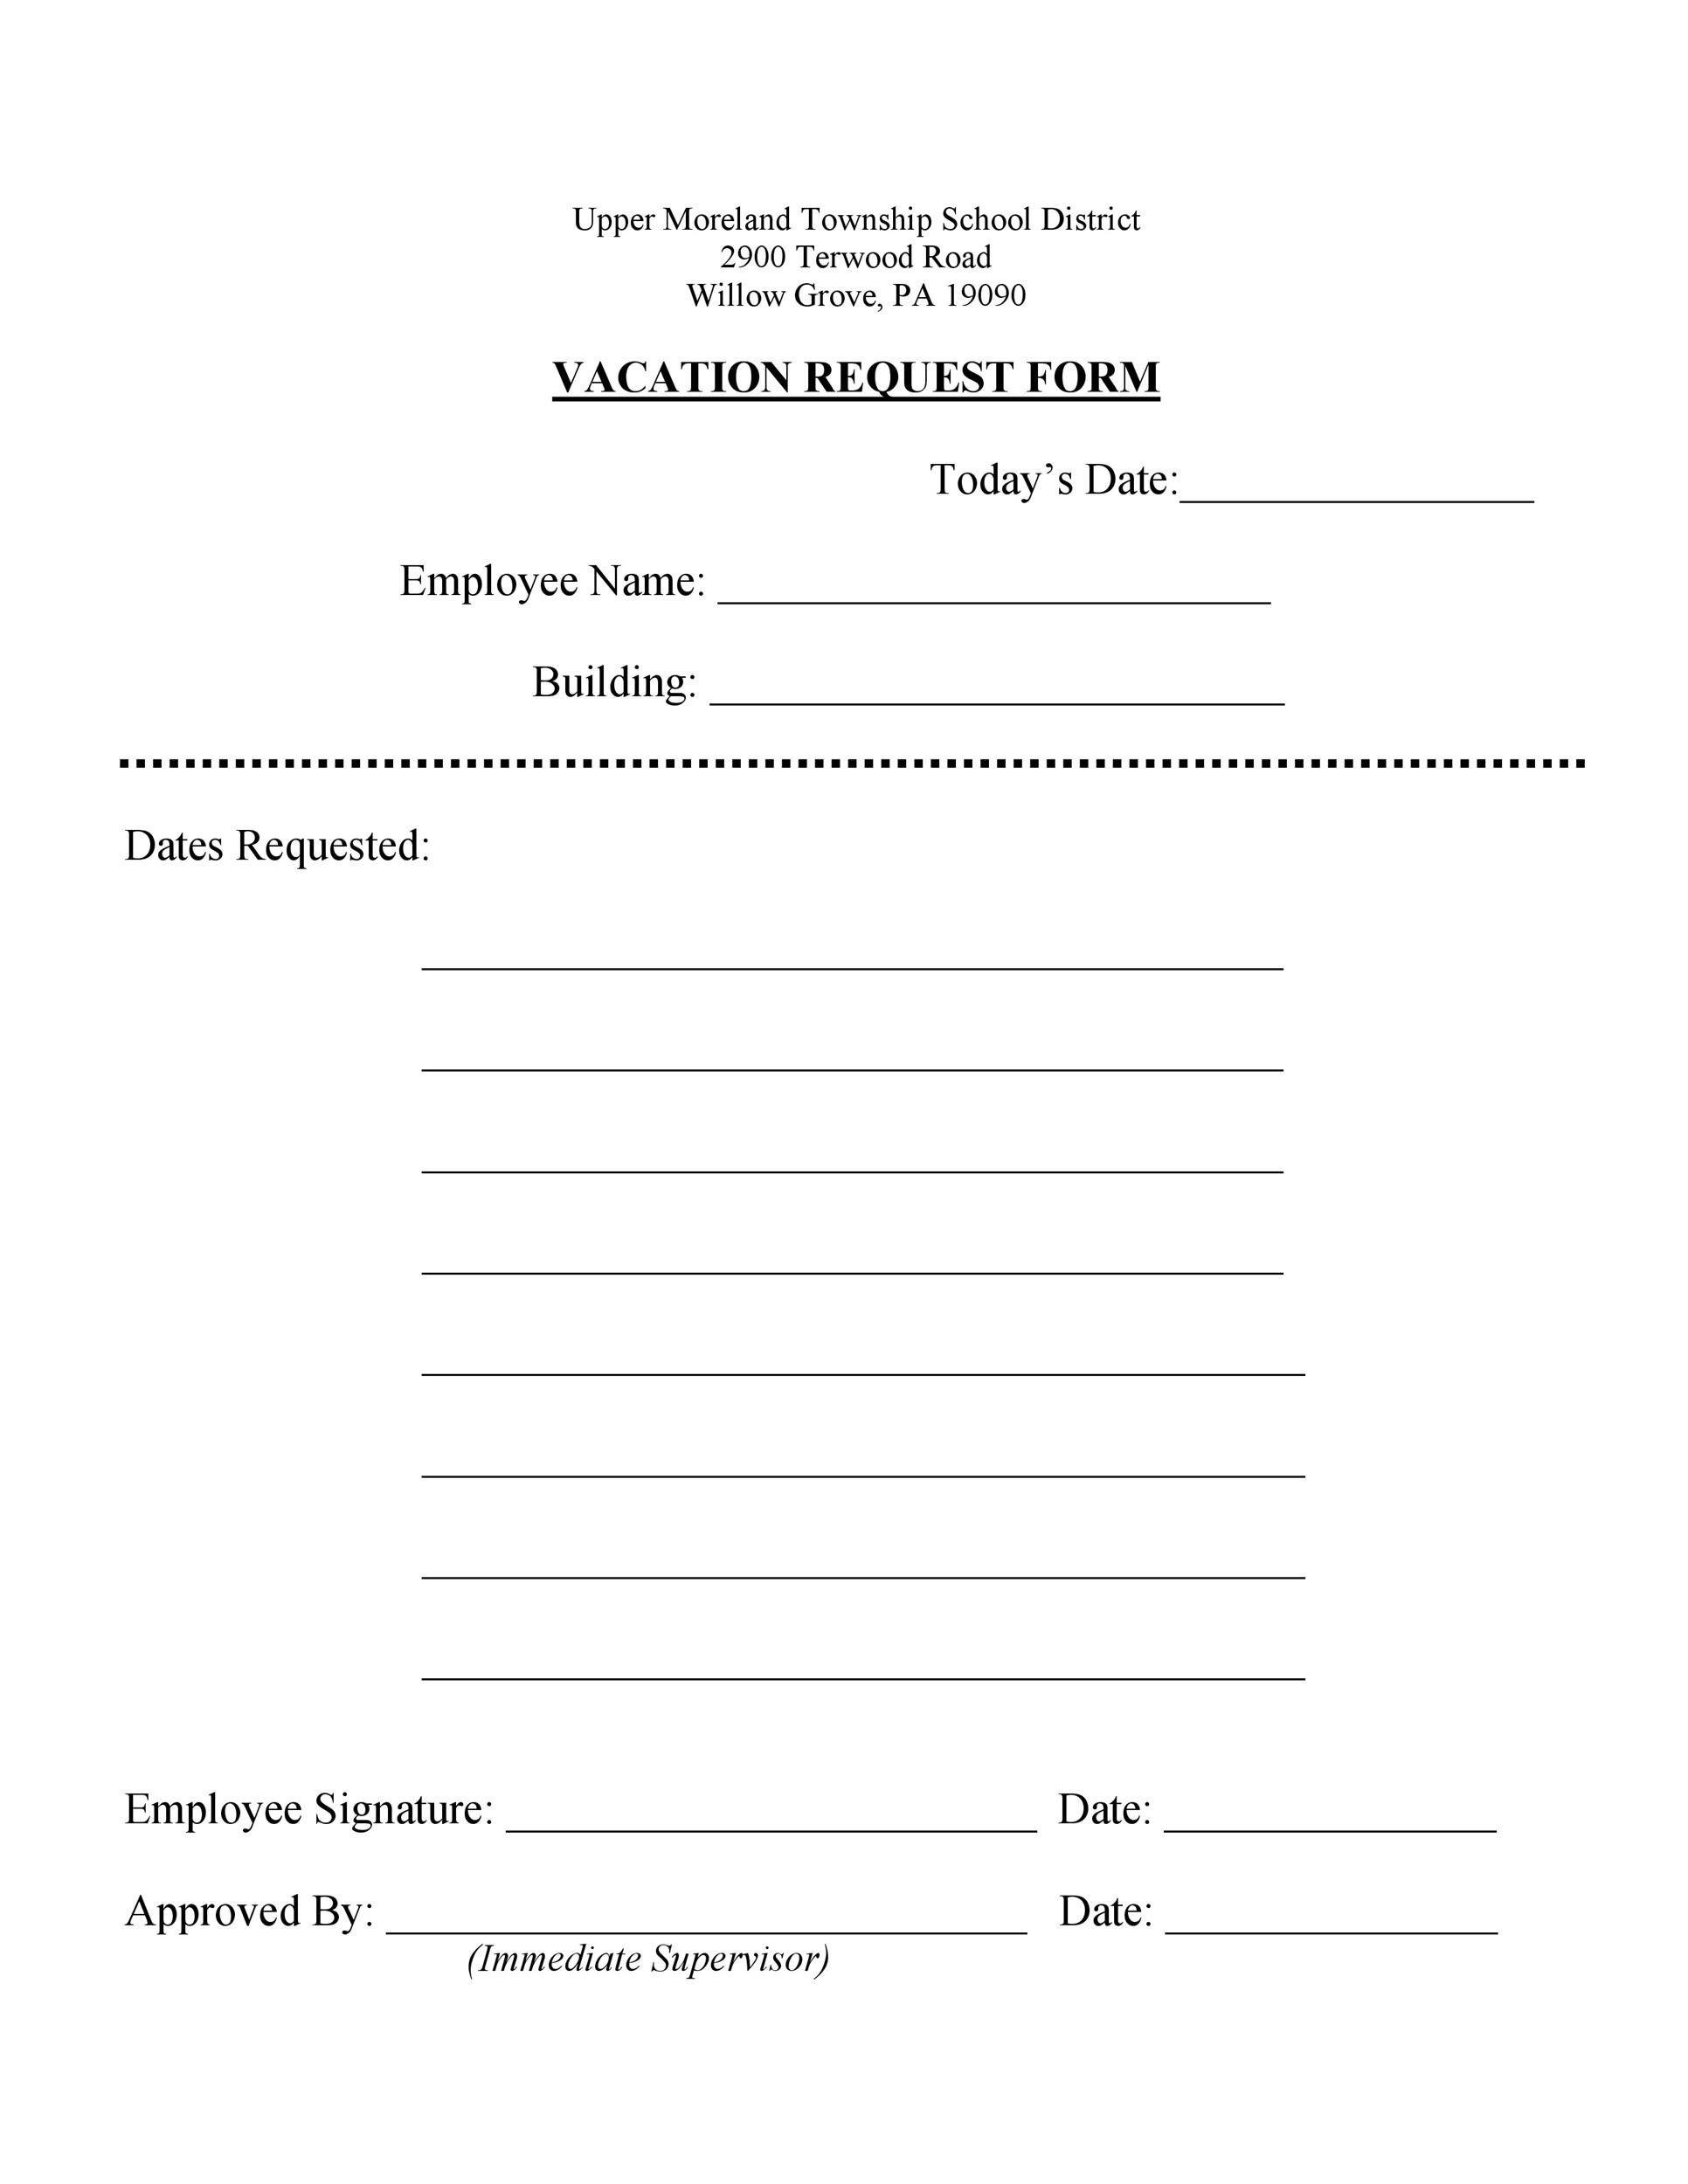 Overtime Authorization Form Template from templatelab.com